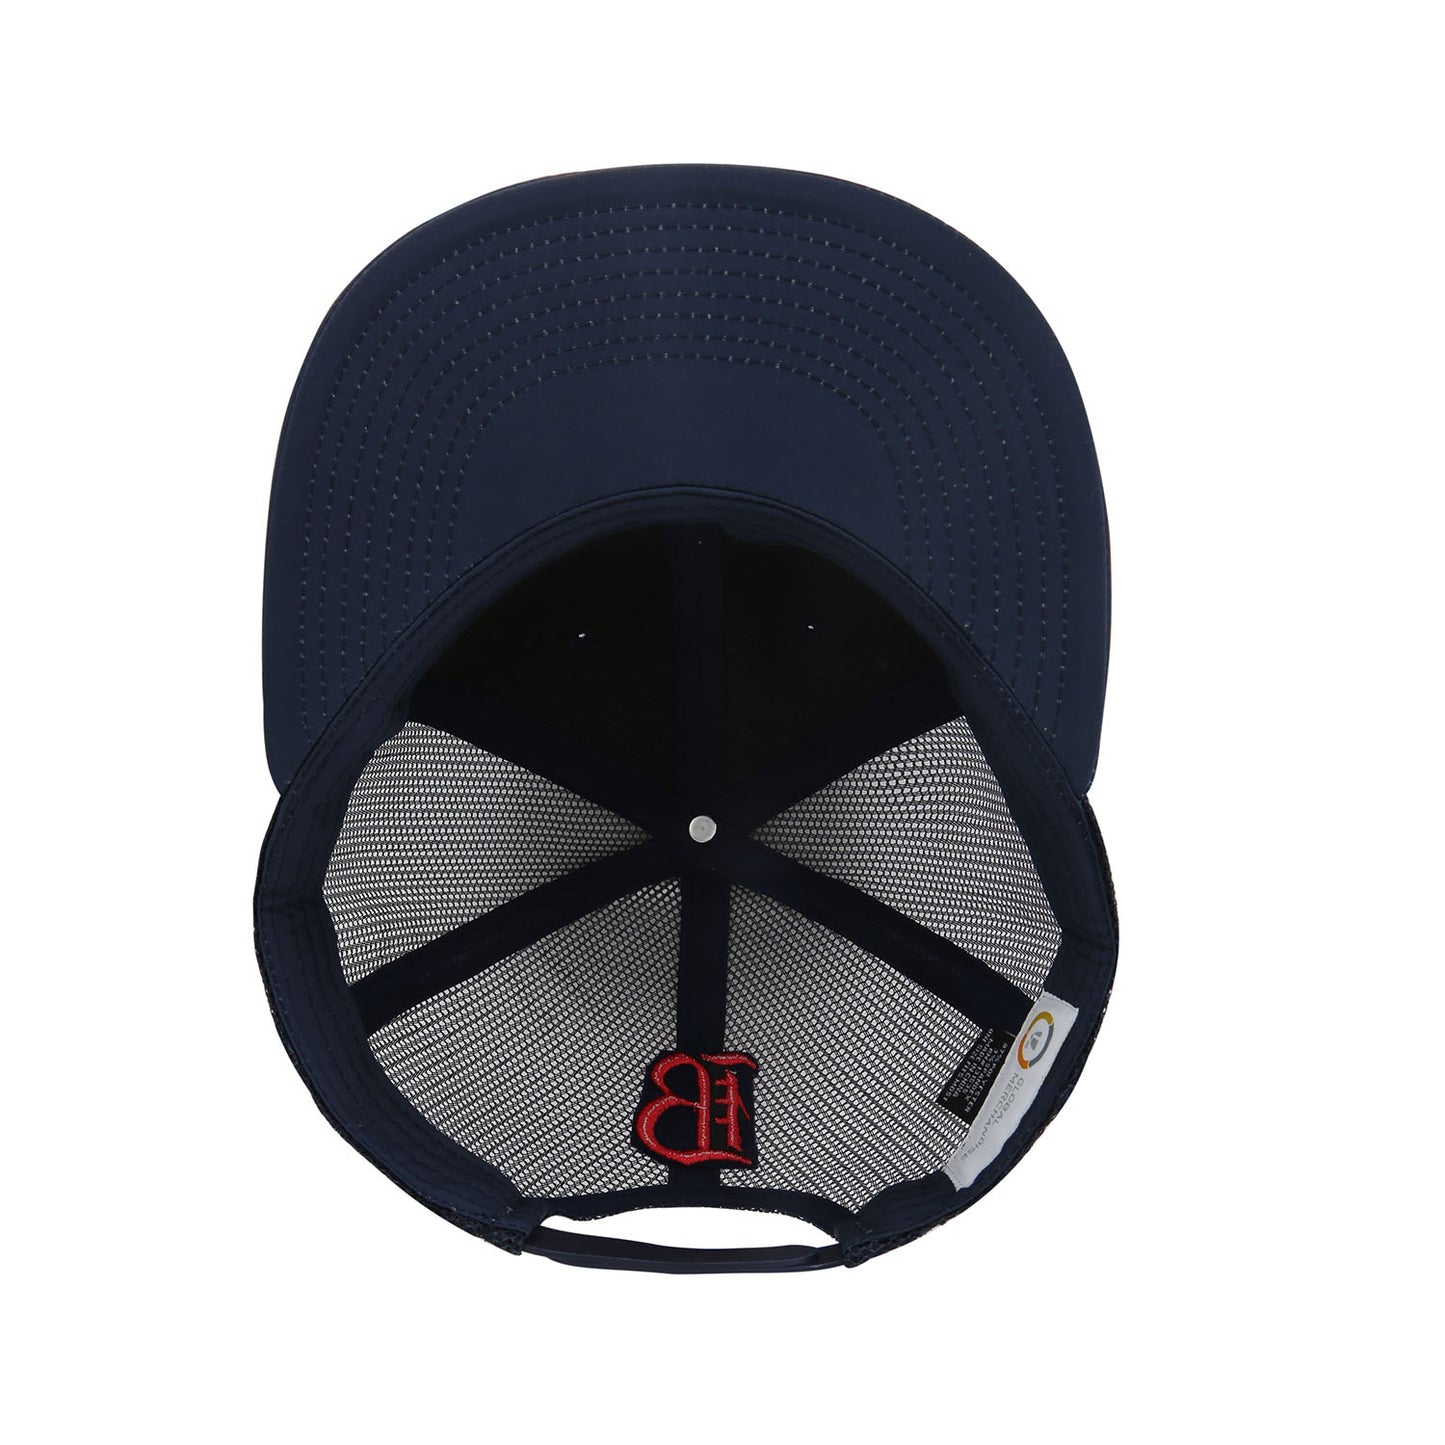 Adult The Game Bay FC Navy Trucker Hat - Underneath View